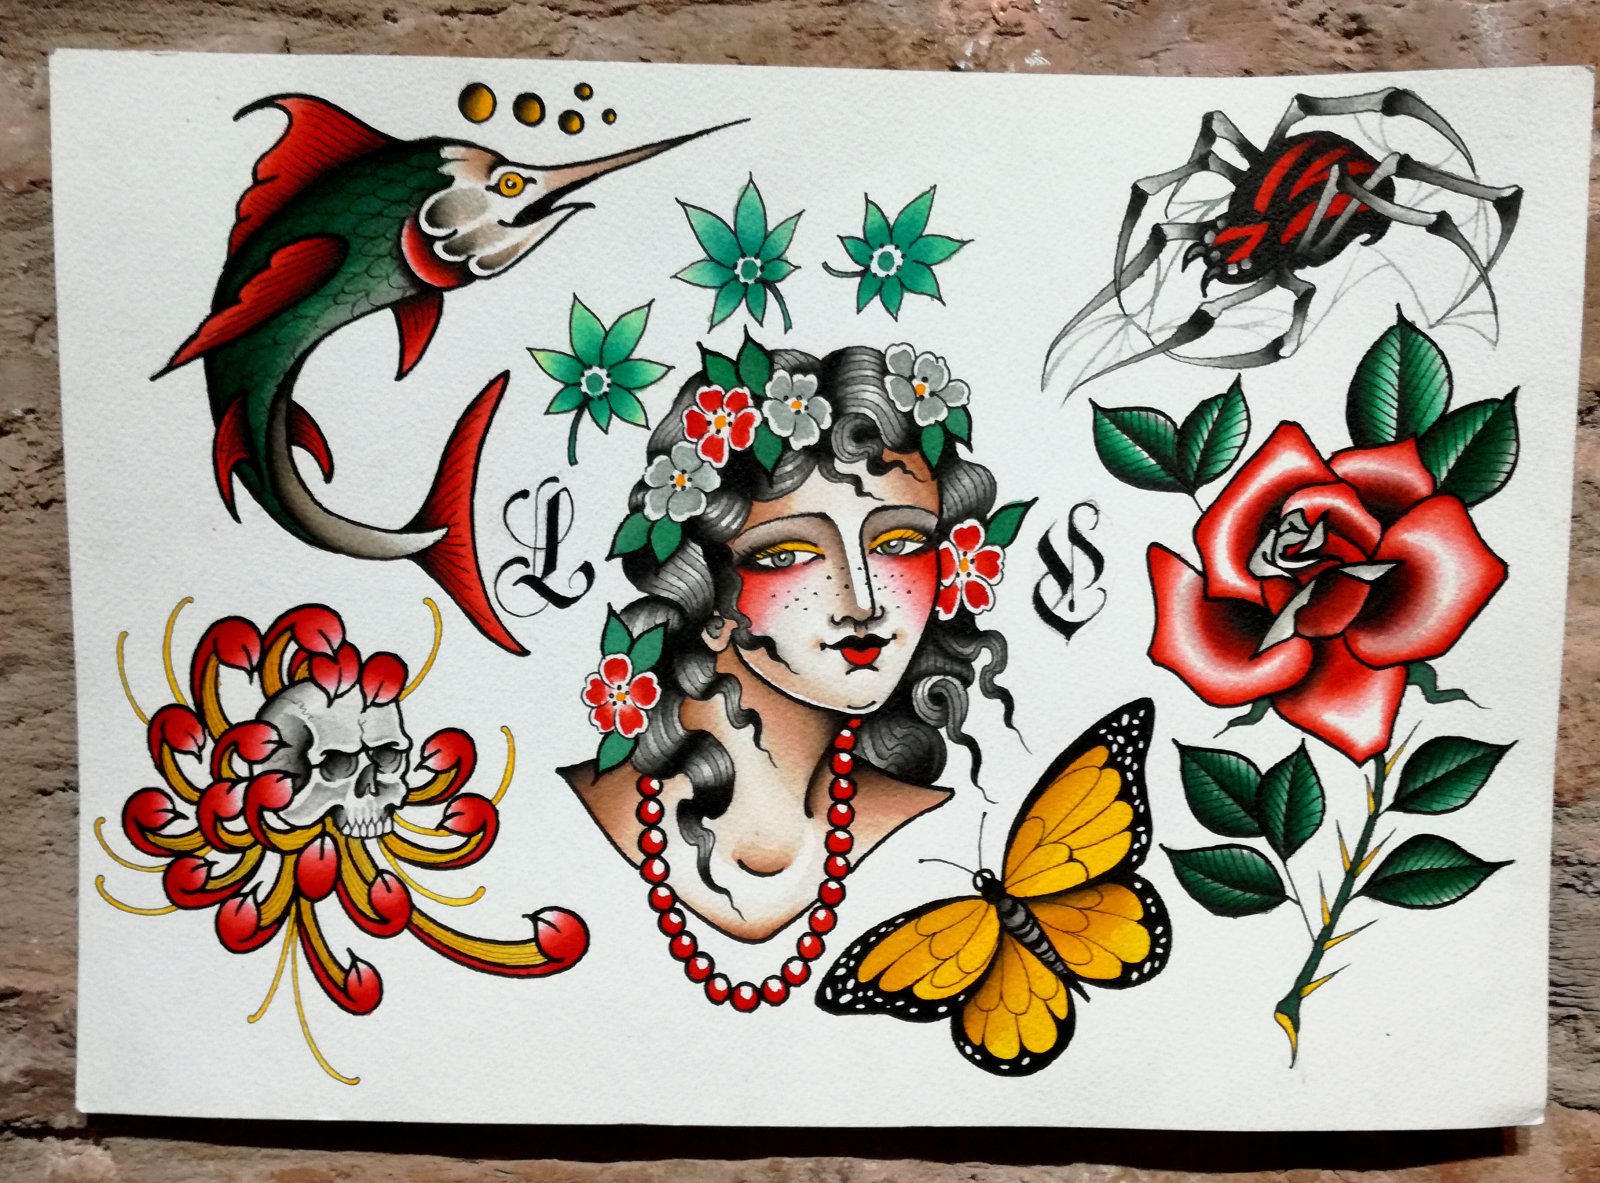 Sick Creations Tattoo  Tattoo flash made by wil traditionaltattooflash  watercolor tattooflash  Facebook